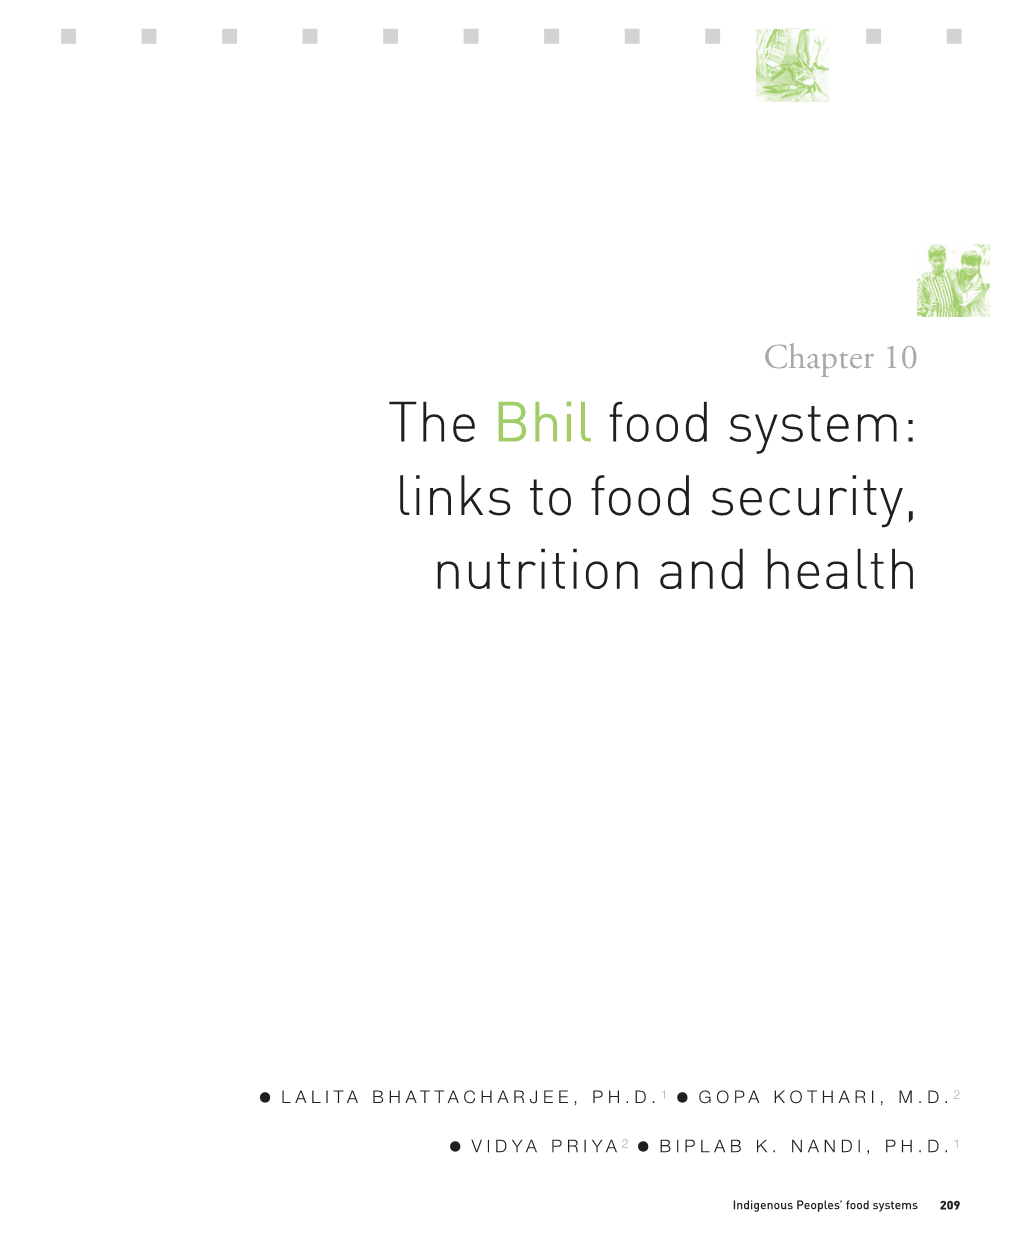 The Bhil Food System: Links to Food Security, Nutrition and Health